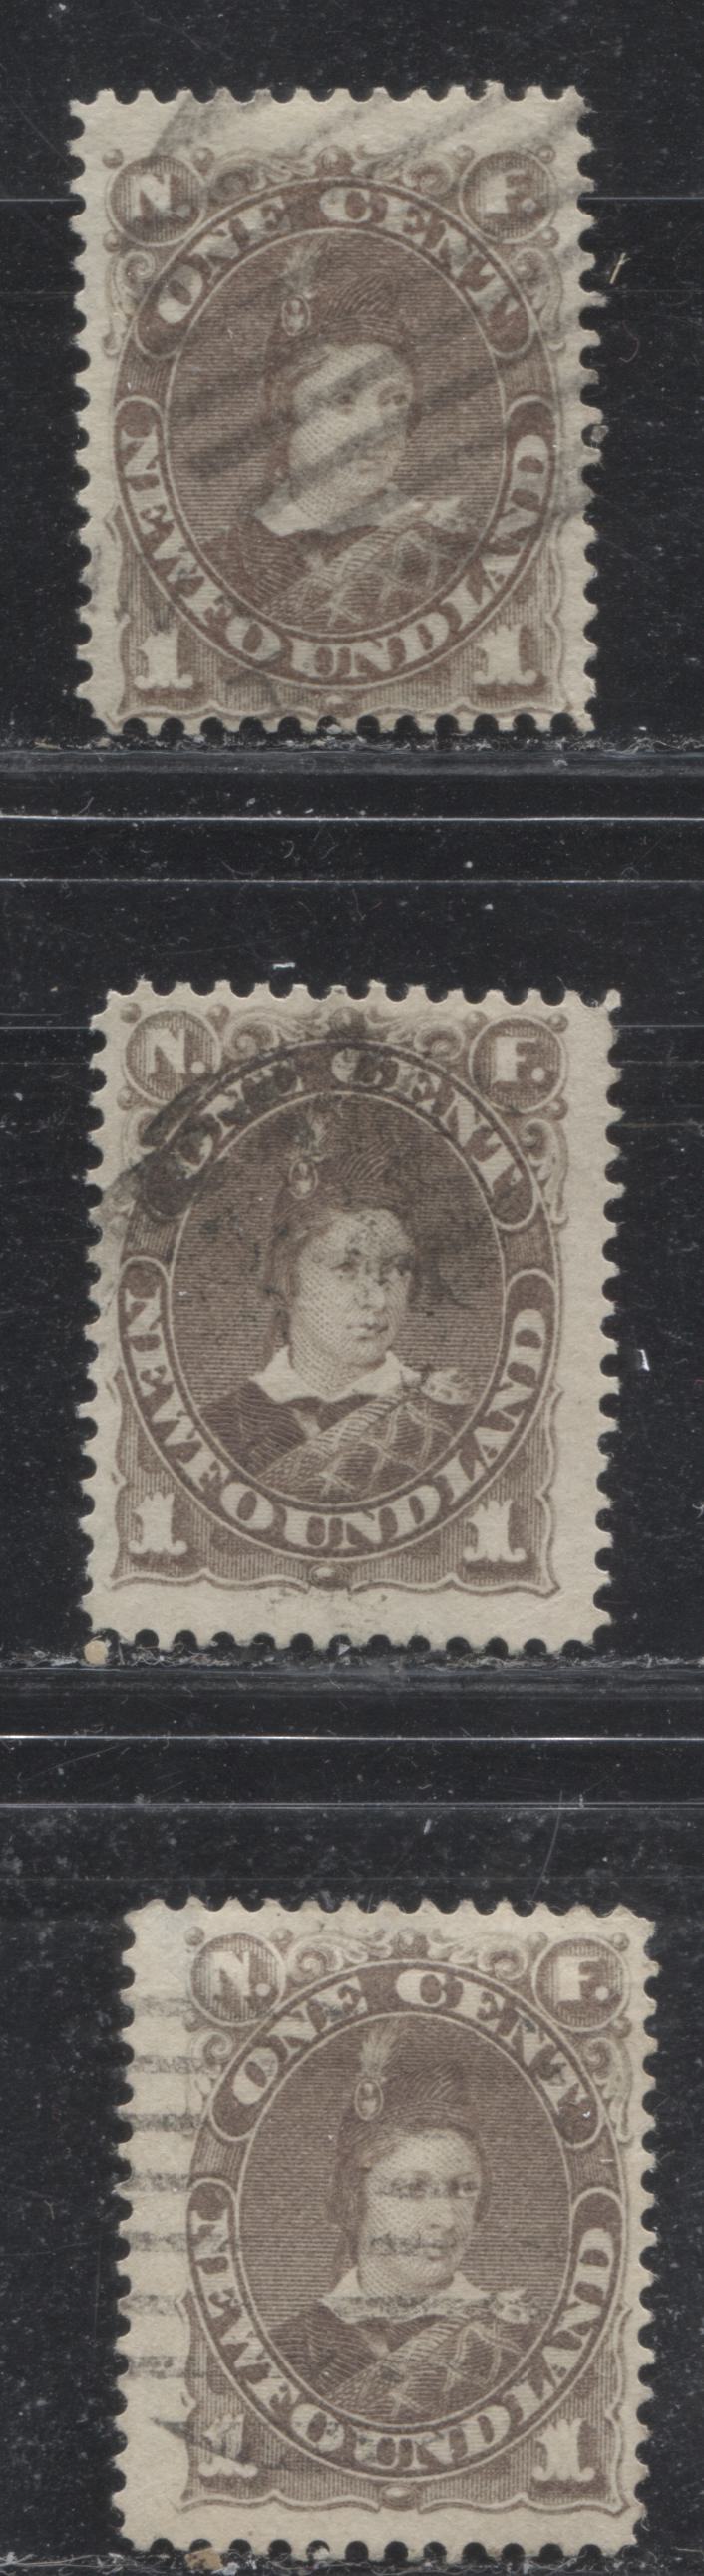 Lot 58 Newfoundland #42 1c Gray Brown Edward, Prince Of Wales, 1880-1896 Third Cents Issue, 3 Fine Used Singles  On Horizontal And Vertical Wove Papers, Perfs 12.2 & 12.25 x 12.2